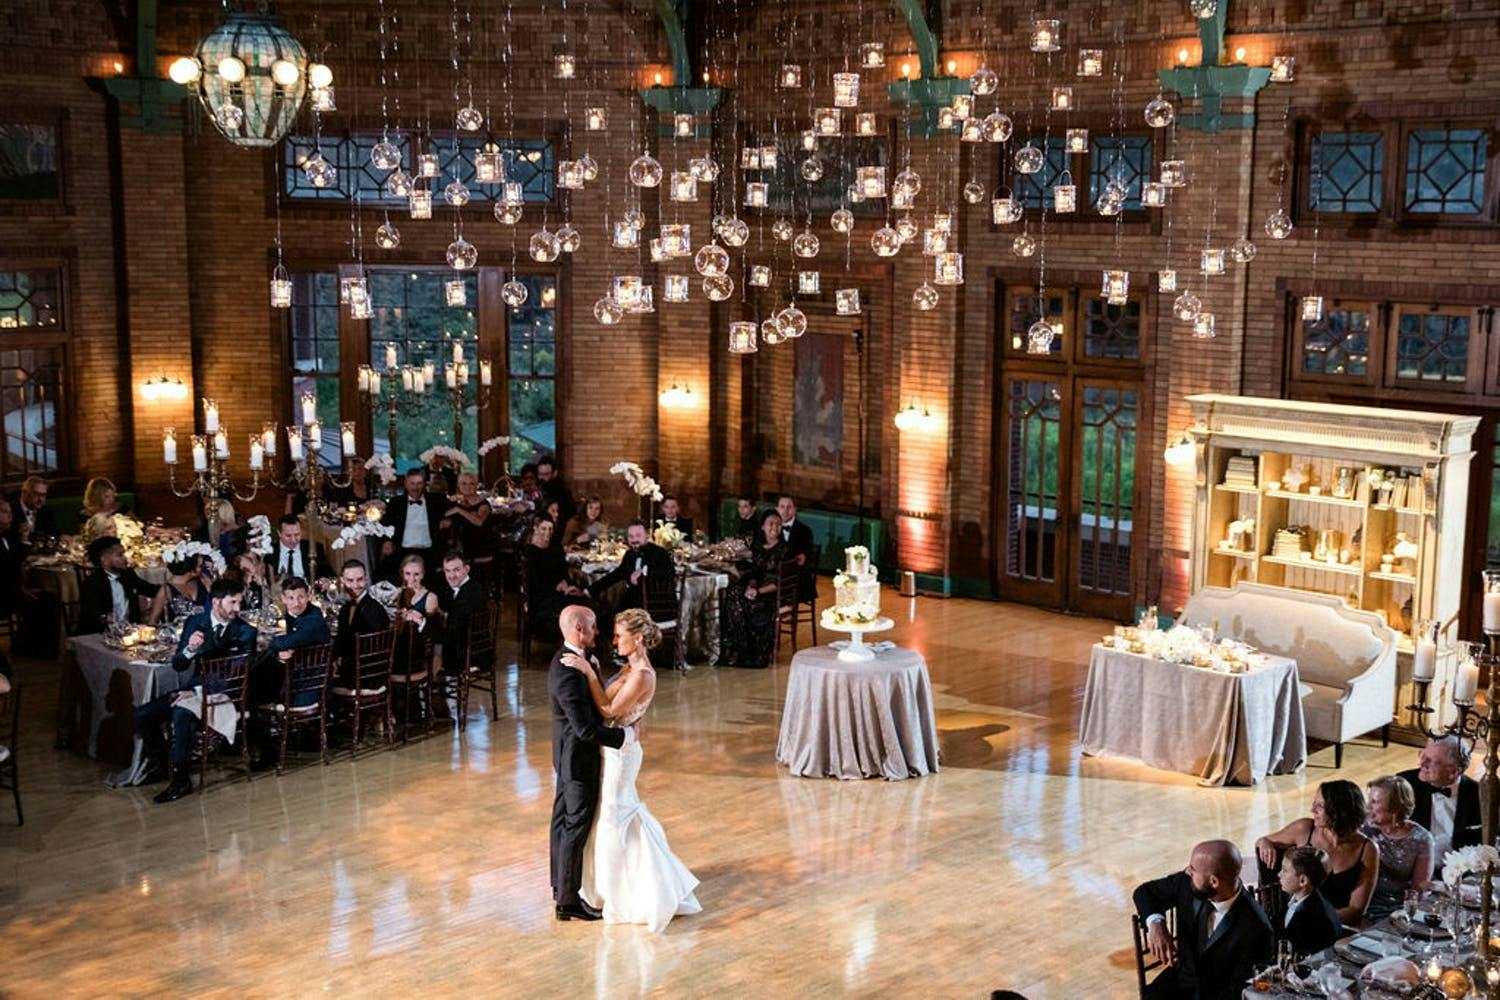 Bride and Groom in the middle of the dance floor with small lights hanging all around.